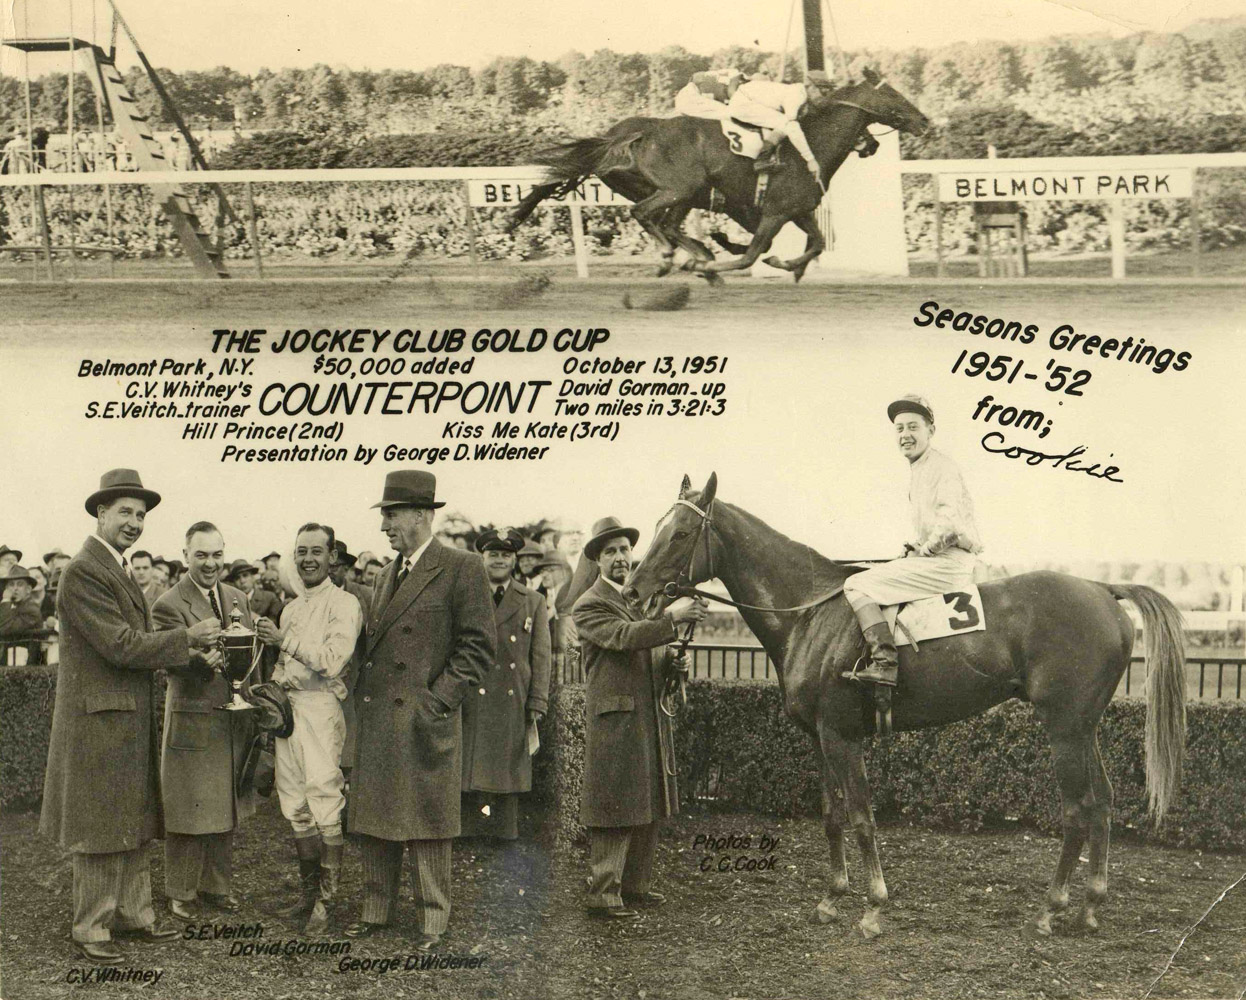 Win composite photograph for the 1951 Jockey Club Gold Cup won by C. V. Whitney's Counterpoint (C. C. Cook/Museum Collection)